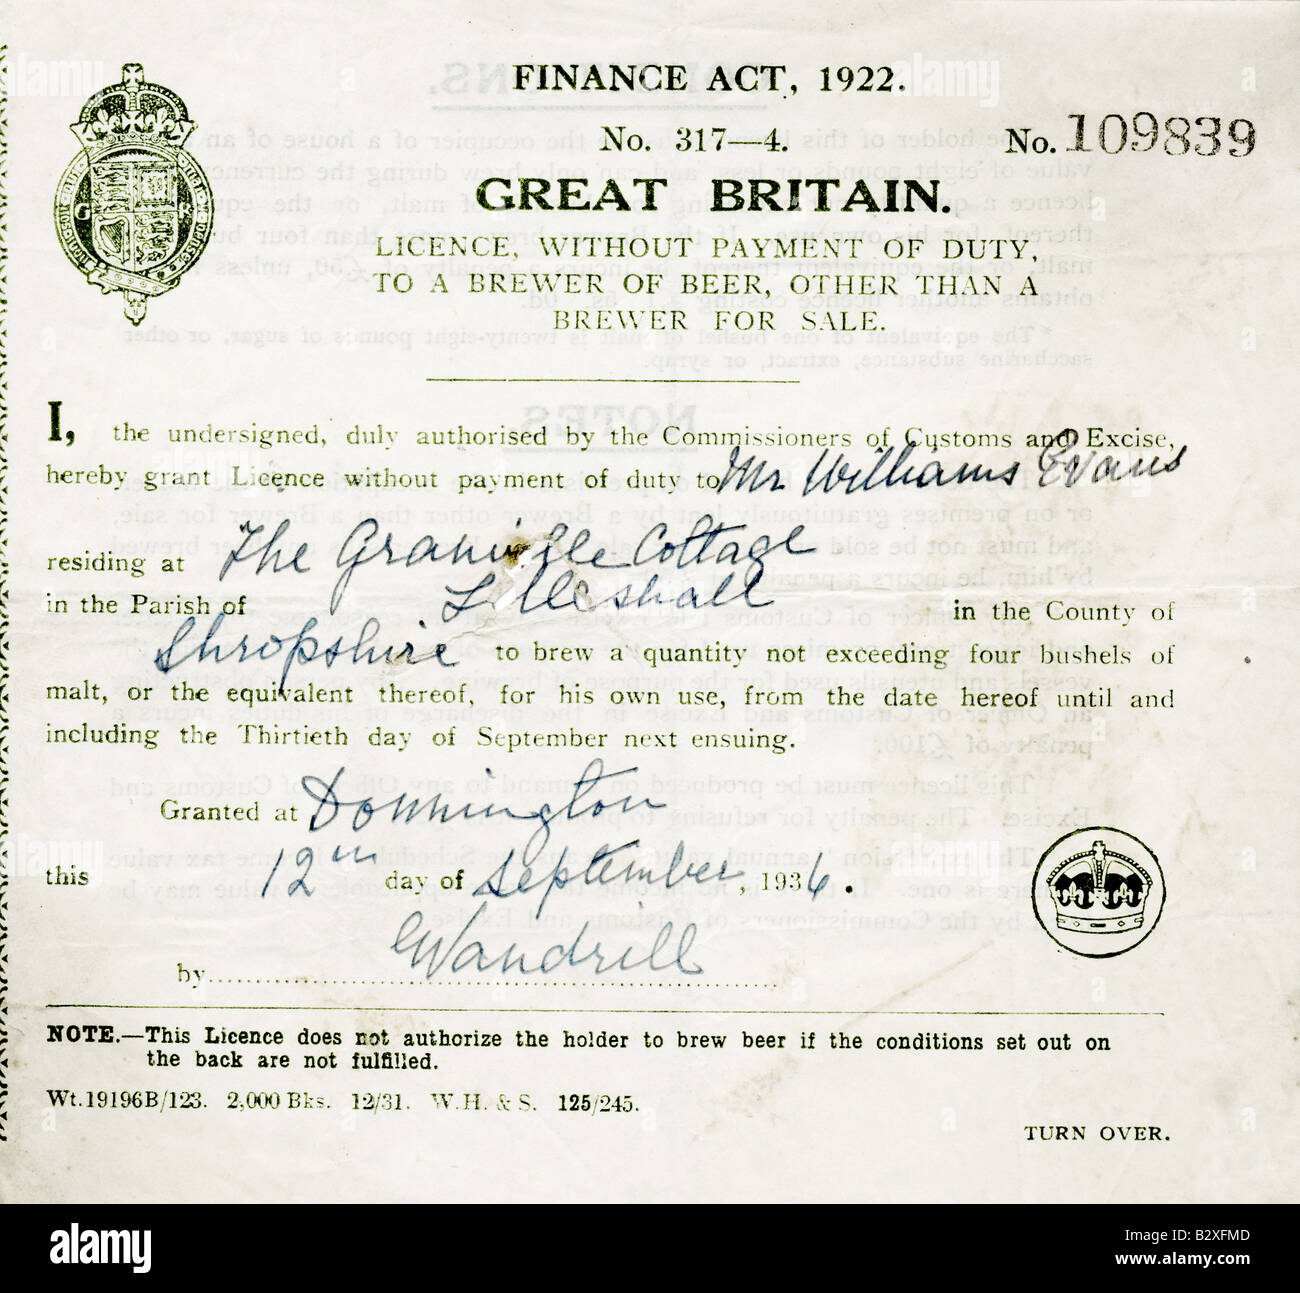 1936 UK Brewing Licence for Home Brewing Only for Own Use and not exceeding Four Bushels of Malt FOR EDITORIAL USE ONLY Stock Photo